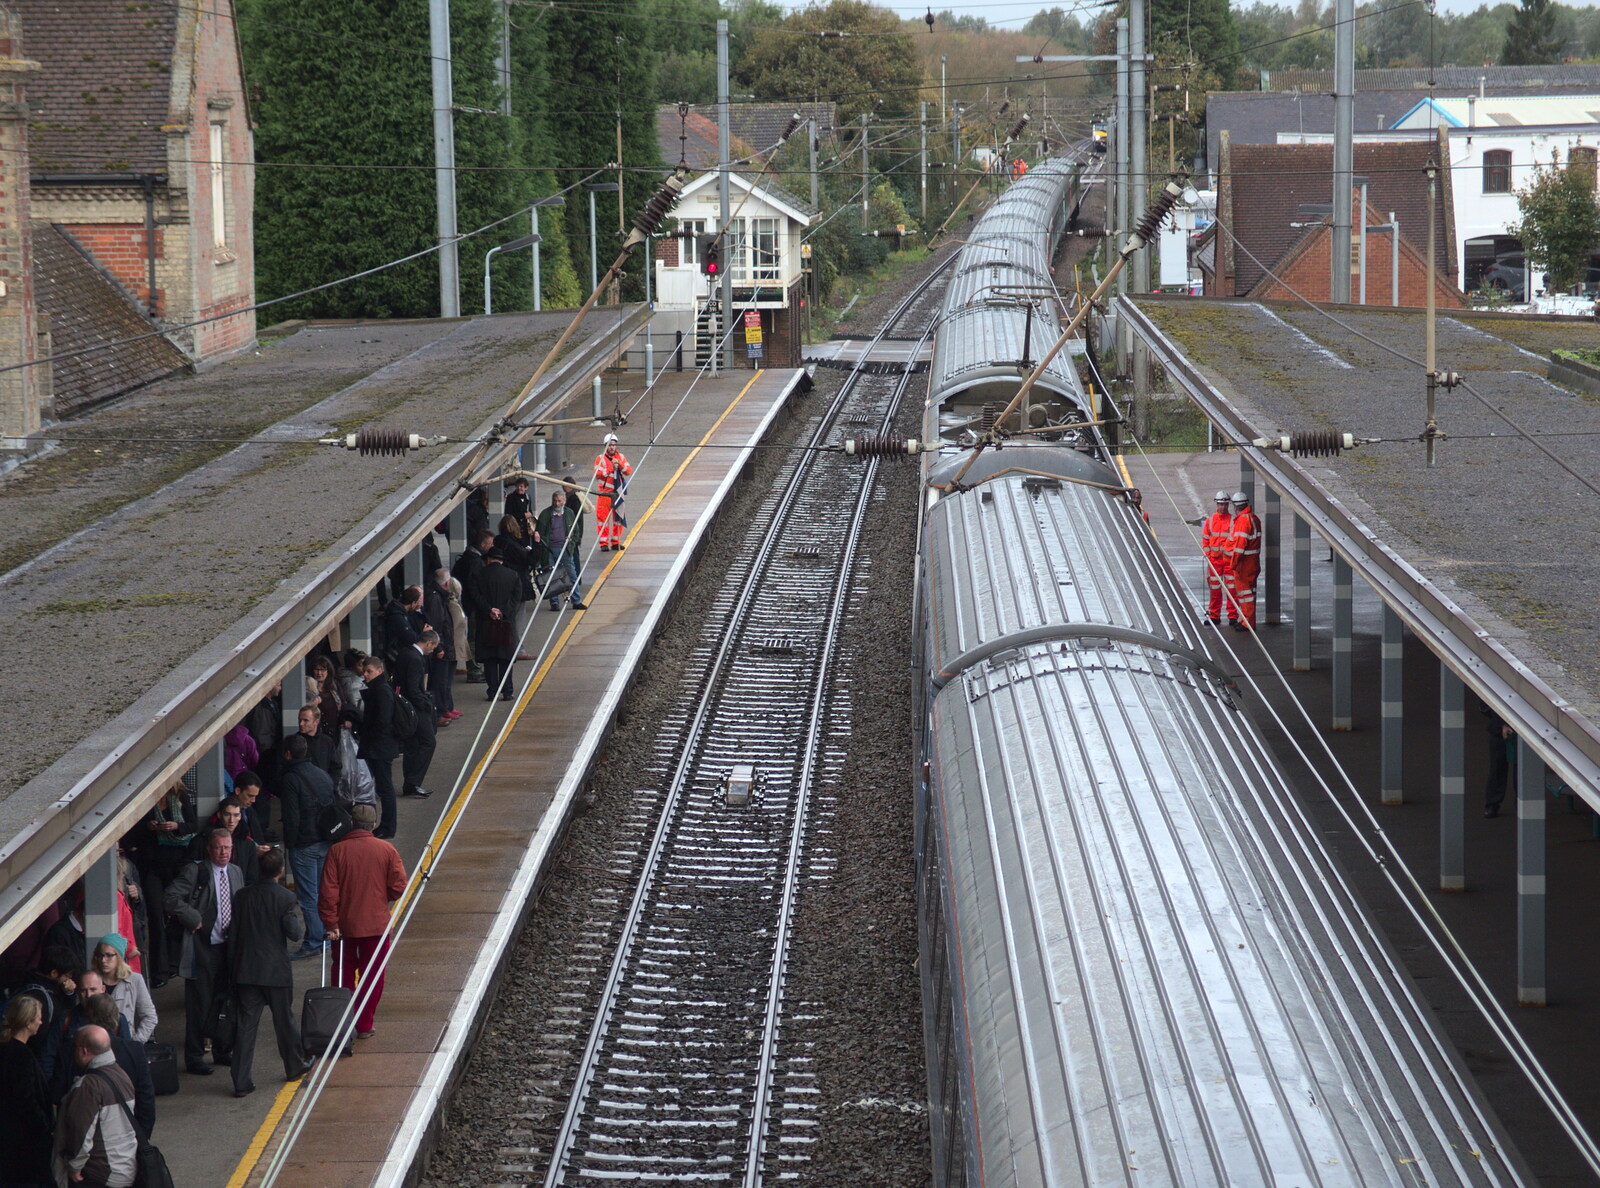 The platform at Stowmarket is filling up from (Very) Long Train (Not) Running, Stowmarket, Suffolk - 21st October 2014